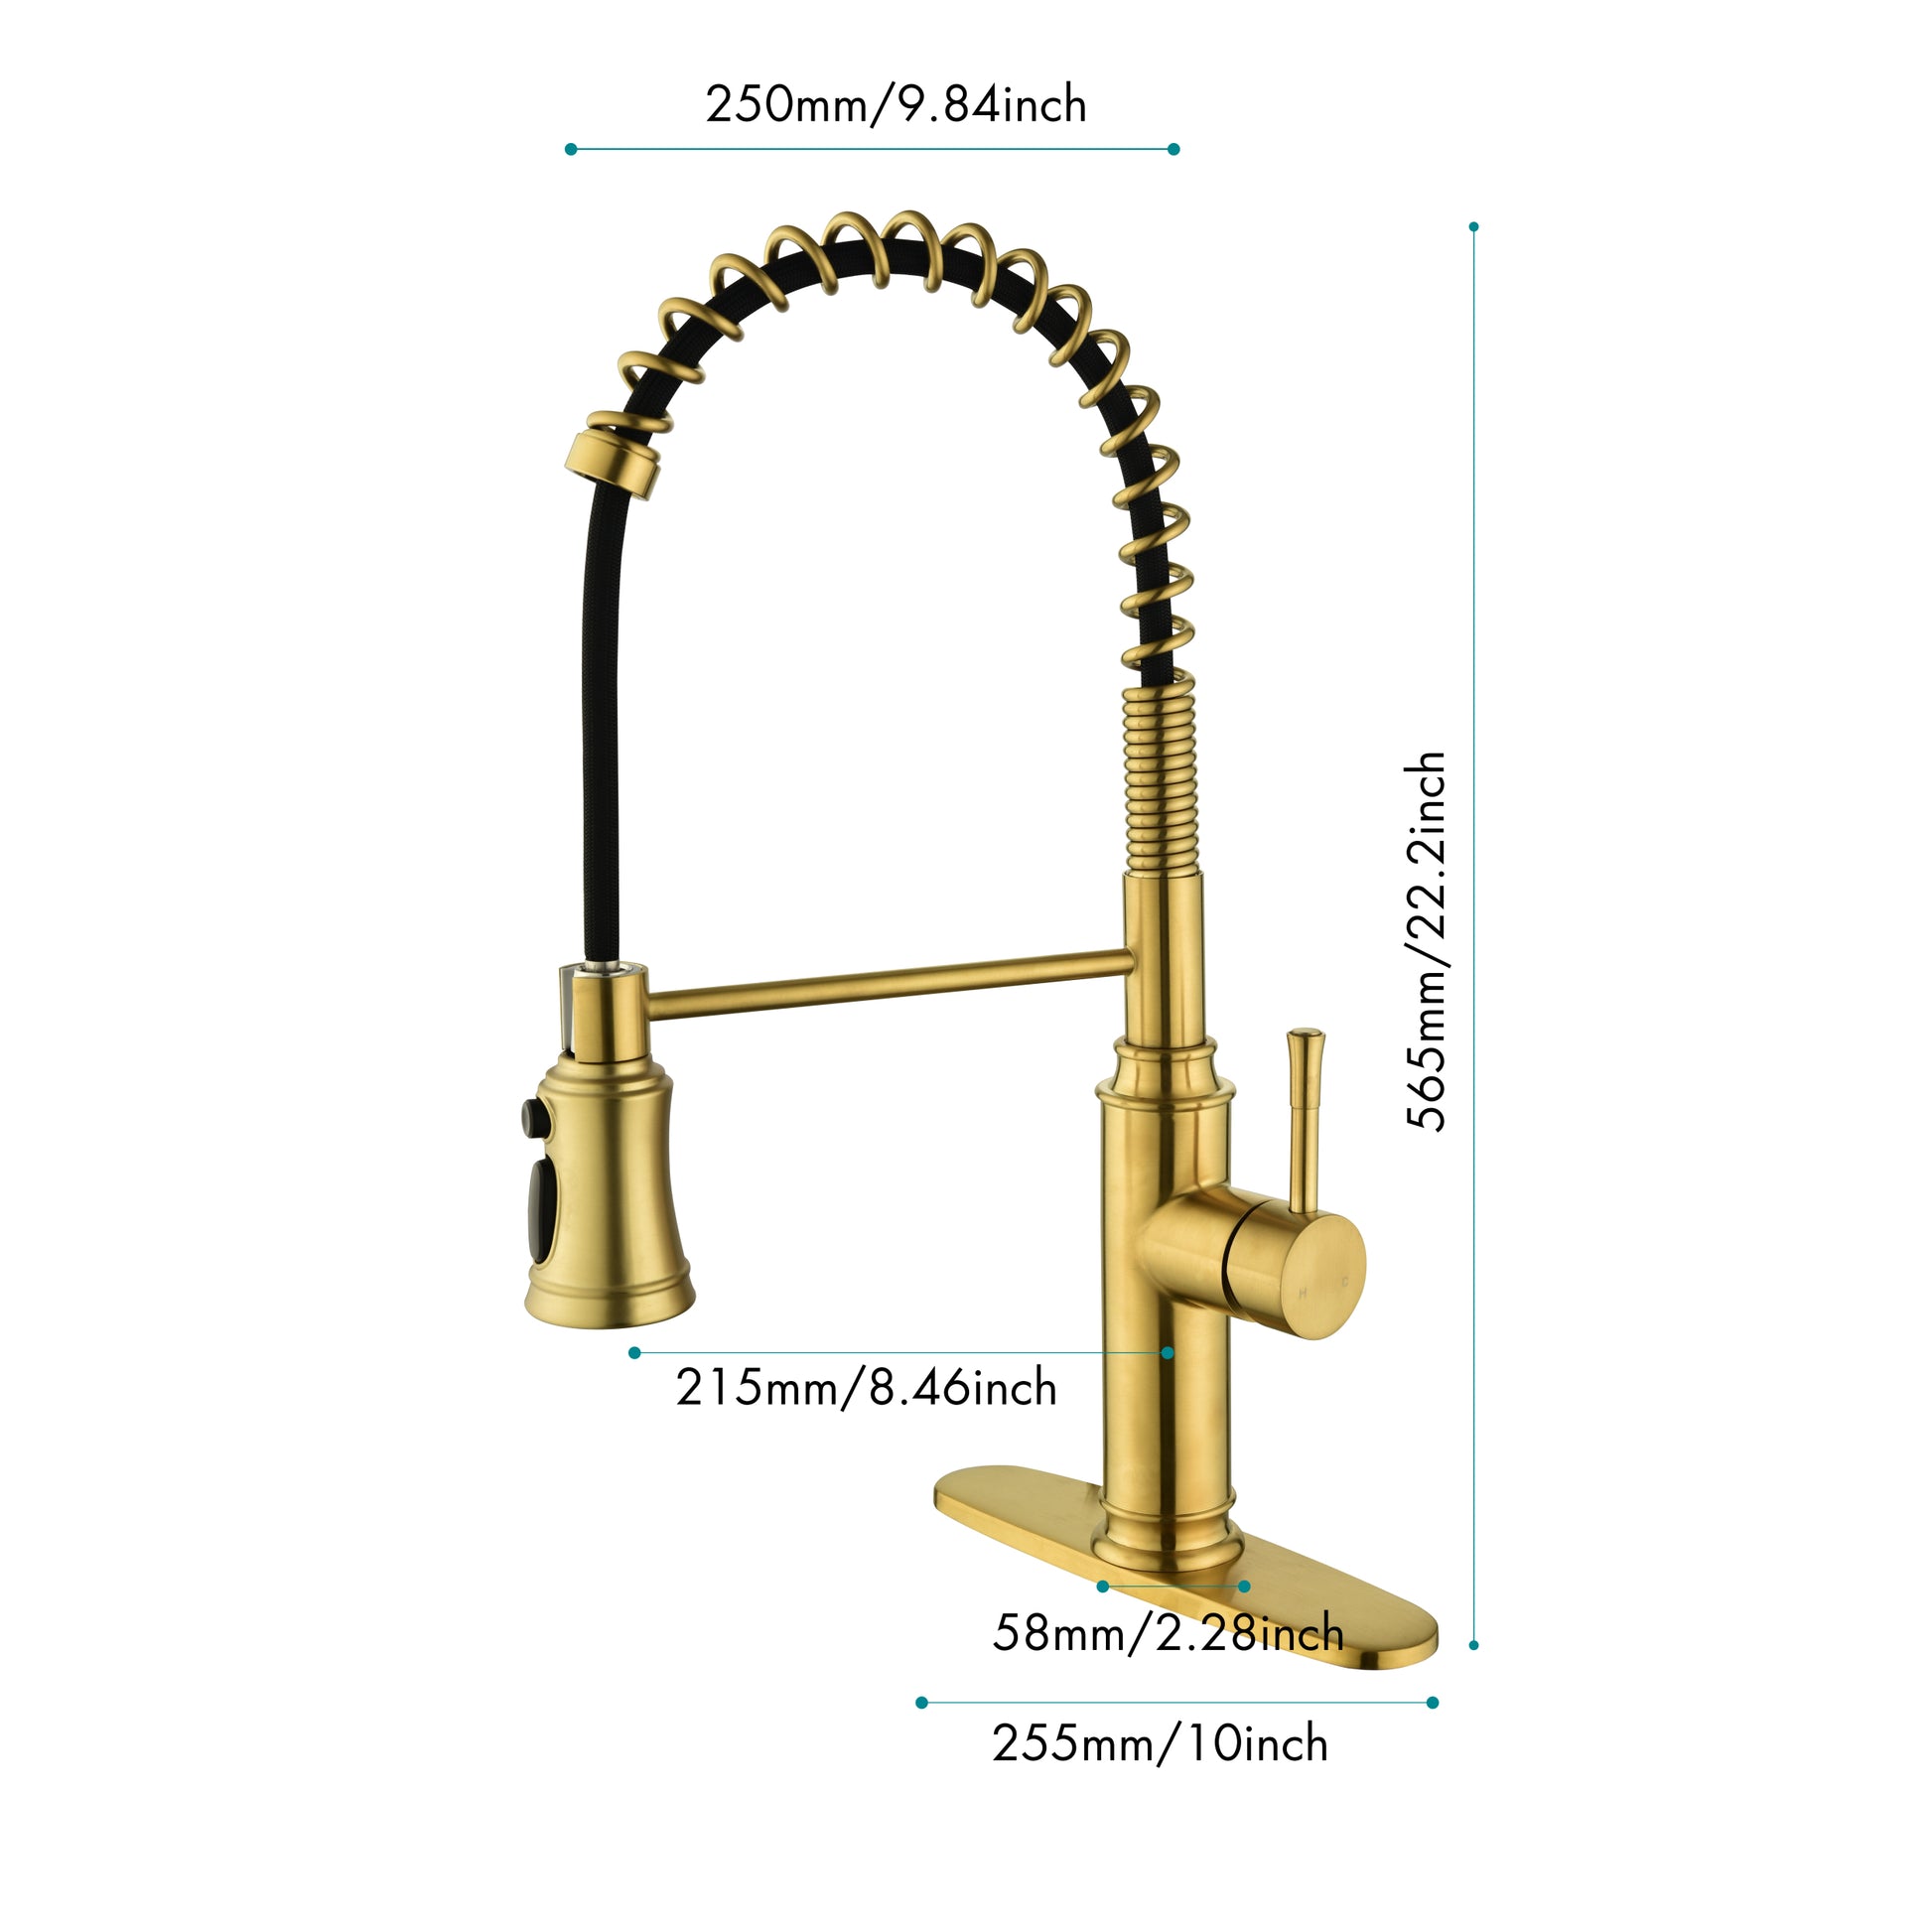 Kitchen Faucet With Pull Down Sprayer - Gold